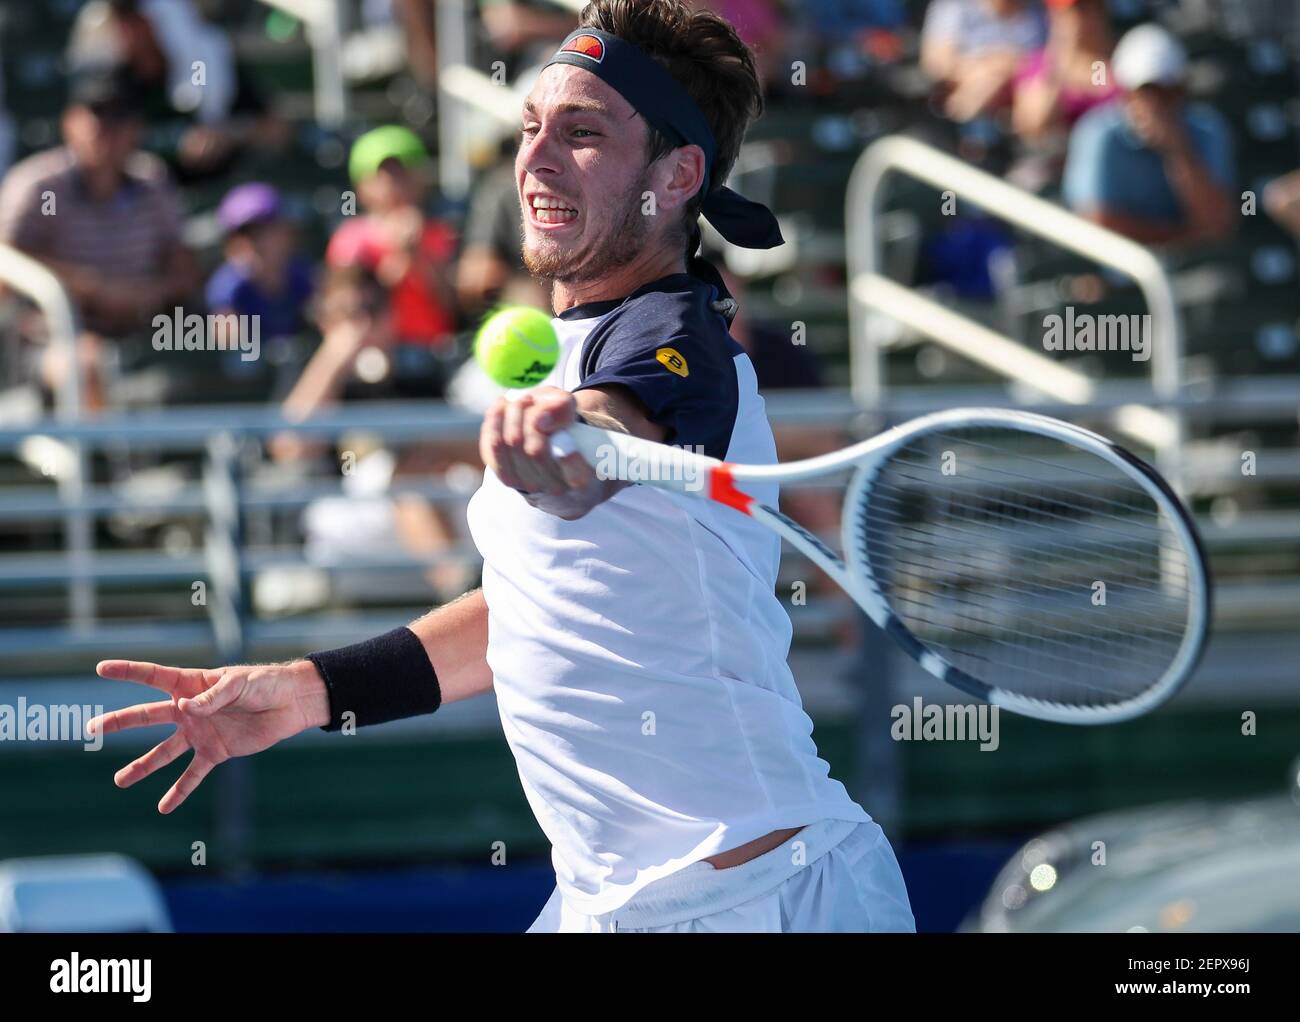 February 19, 2018: Cameron Norrie, of Great Britain, hits a forehand  against Hyeon Chung, from Korea, during the 2018 Delray Beach Open ATP  professional tennis tournament, played at the Delray Beach Stadium